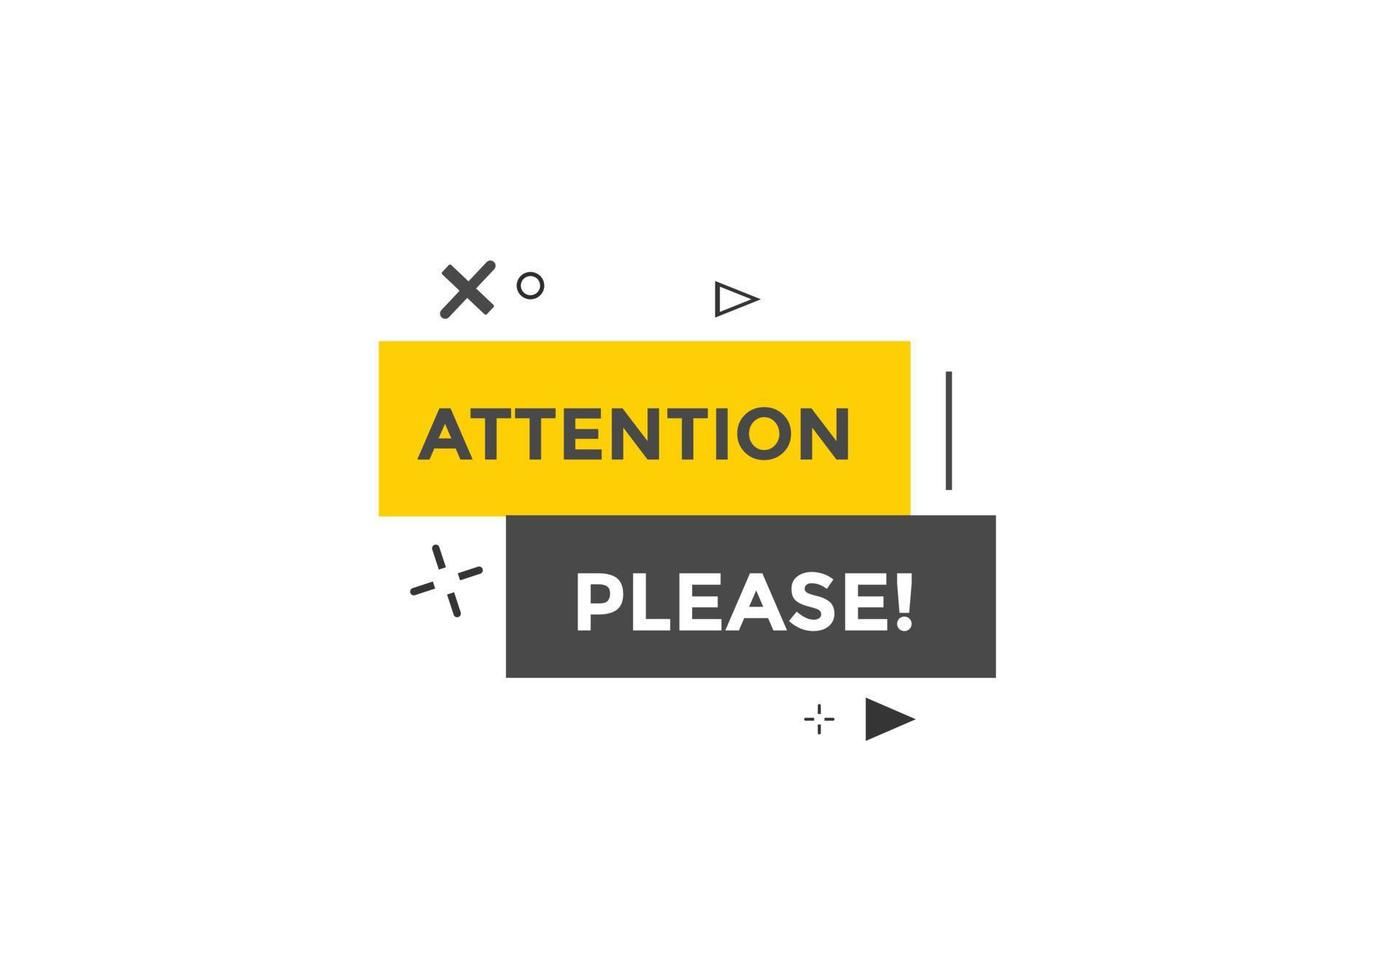 Attention please button. Attention please text template for website. Attention please icon flat style vector